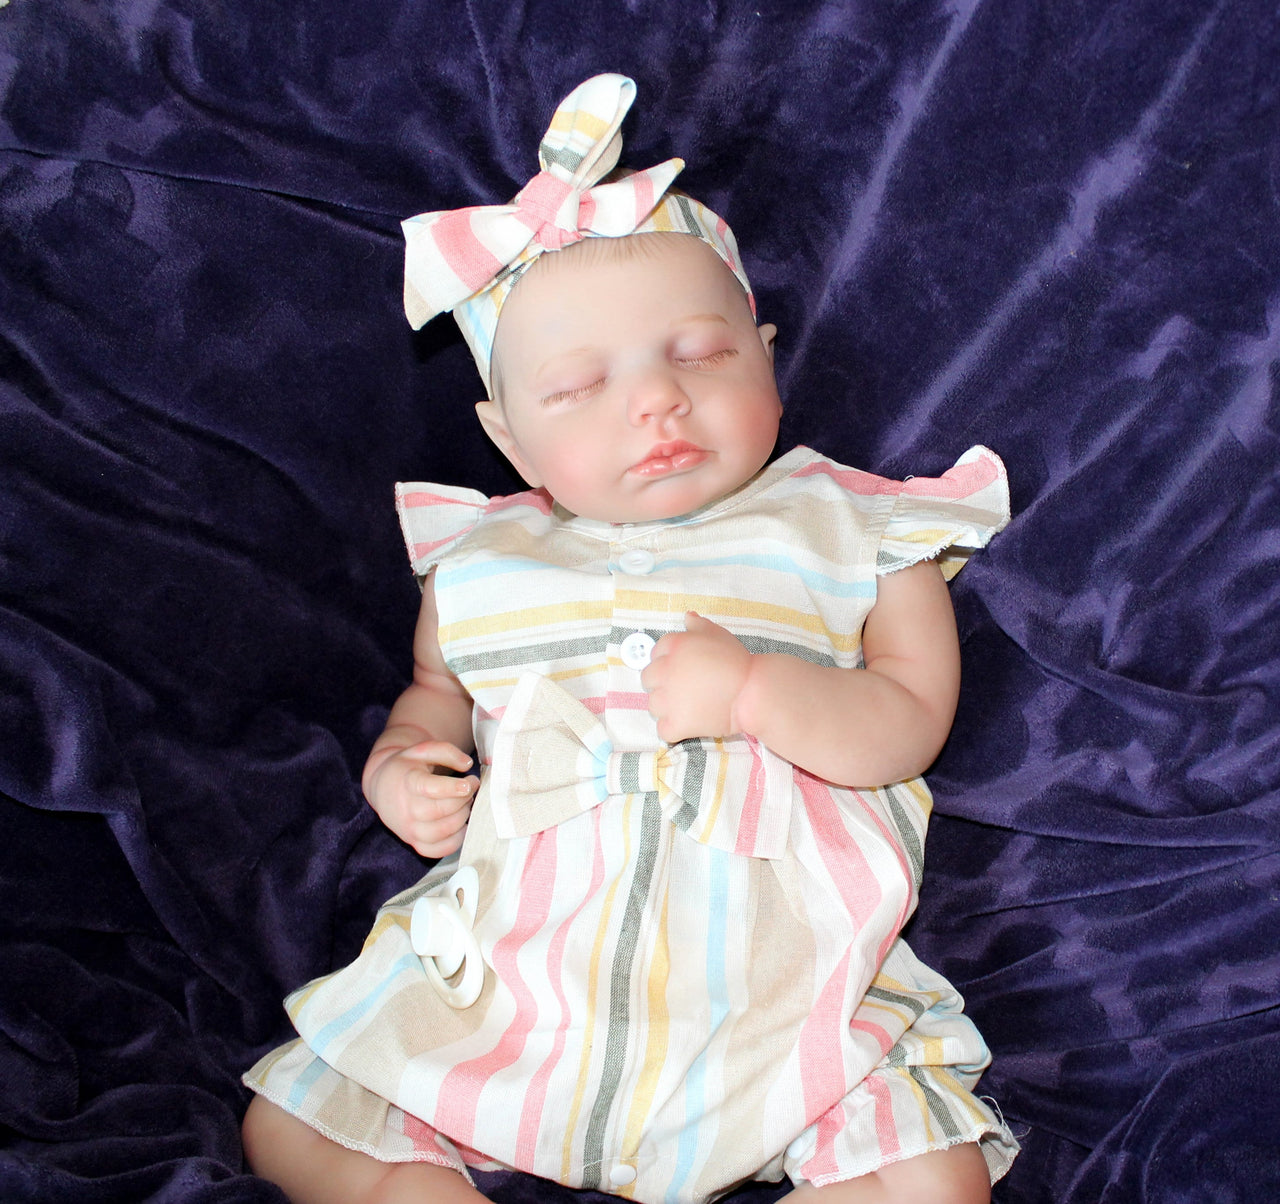 Lifelike Reborn Baby Doll 20” 2 to 8 Pounds Weighted Newborn Baby Girl/Boy Soft Heavy Baby Dolls For Children Child Friendly Gifts For Girls